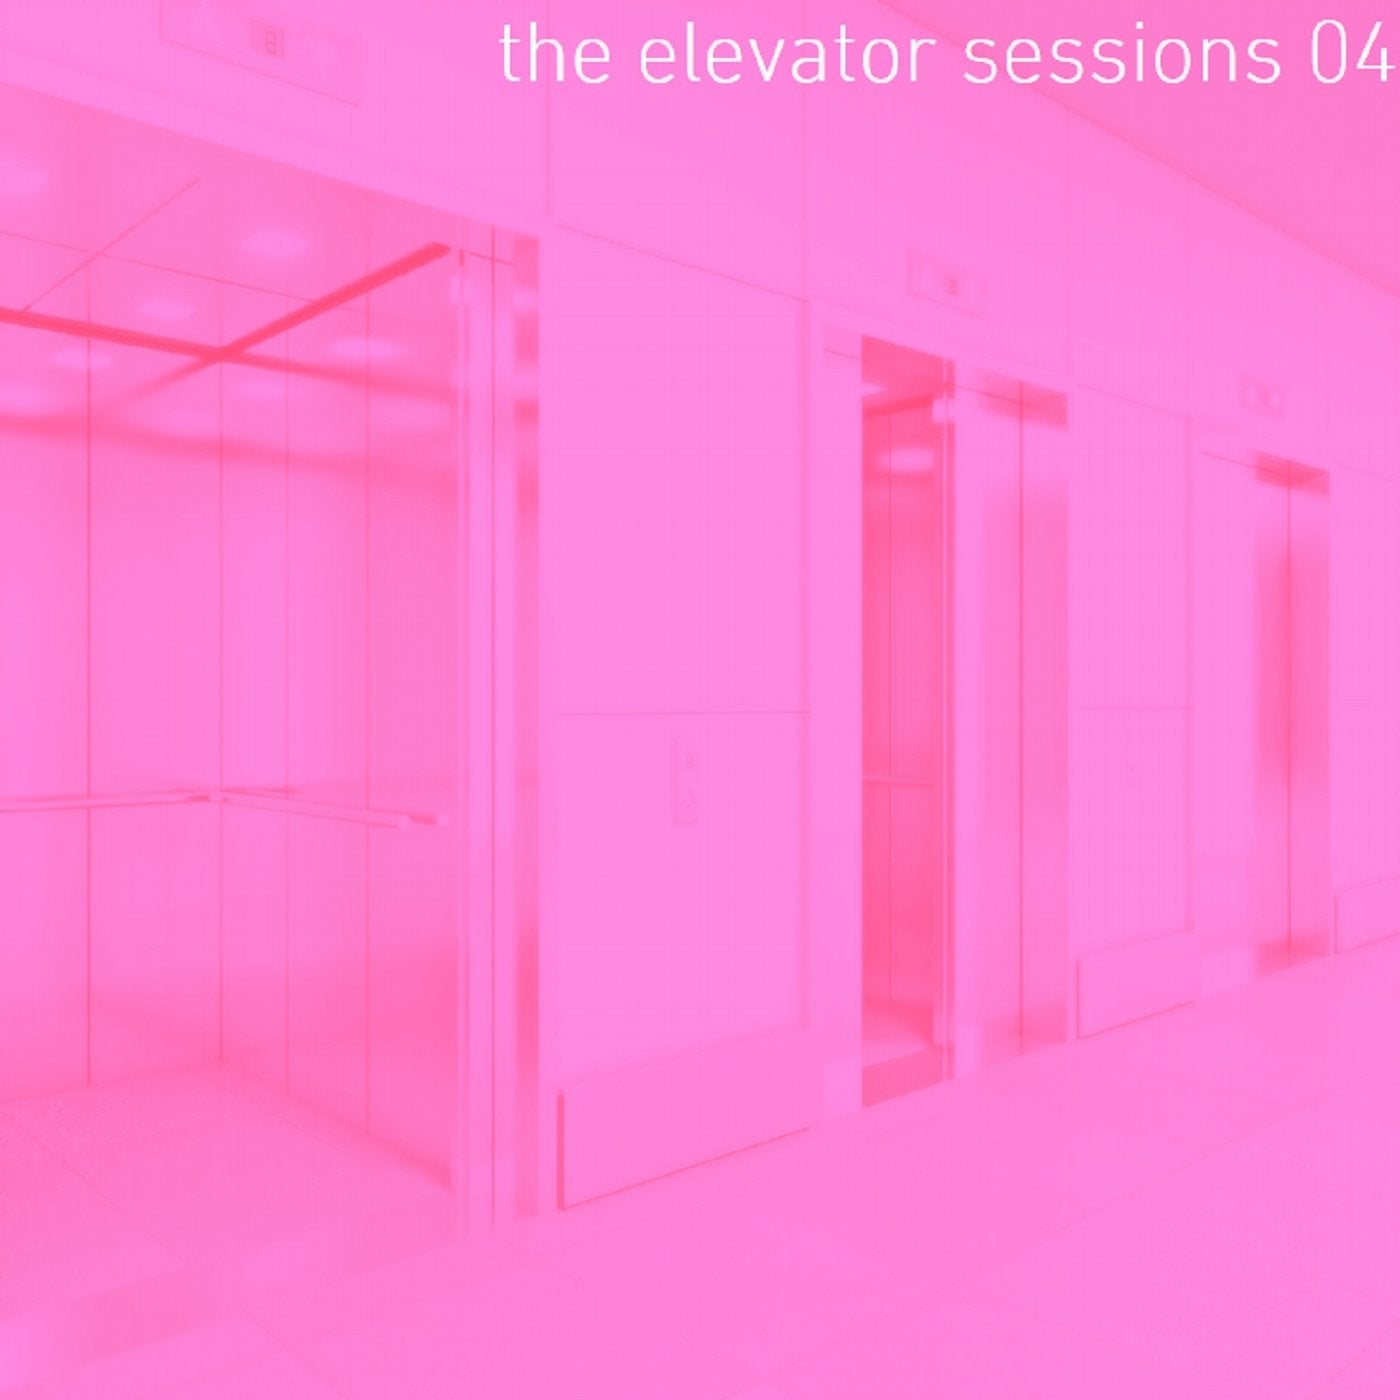 The Elevator Sessions 04 (Compiled & Mixed by Klangstein)